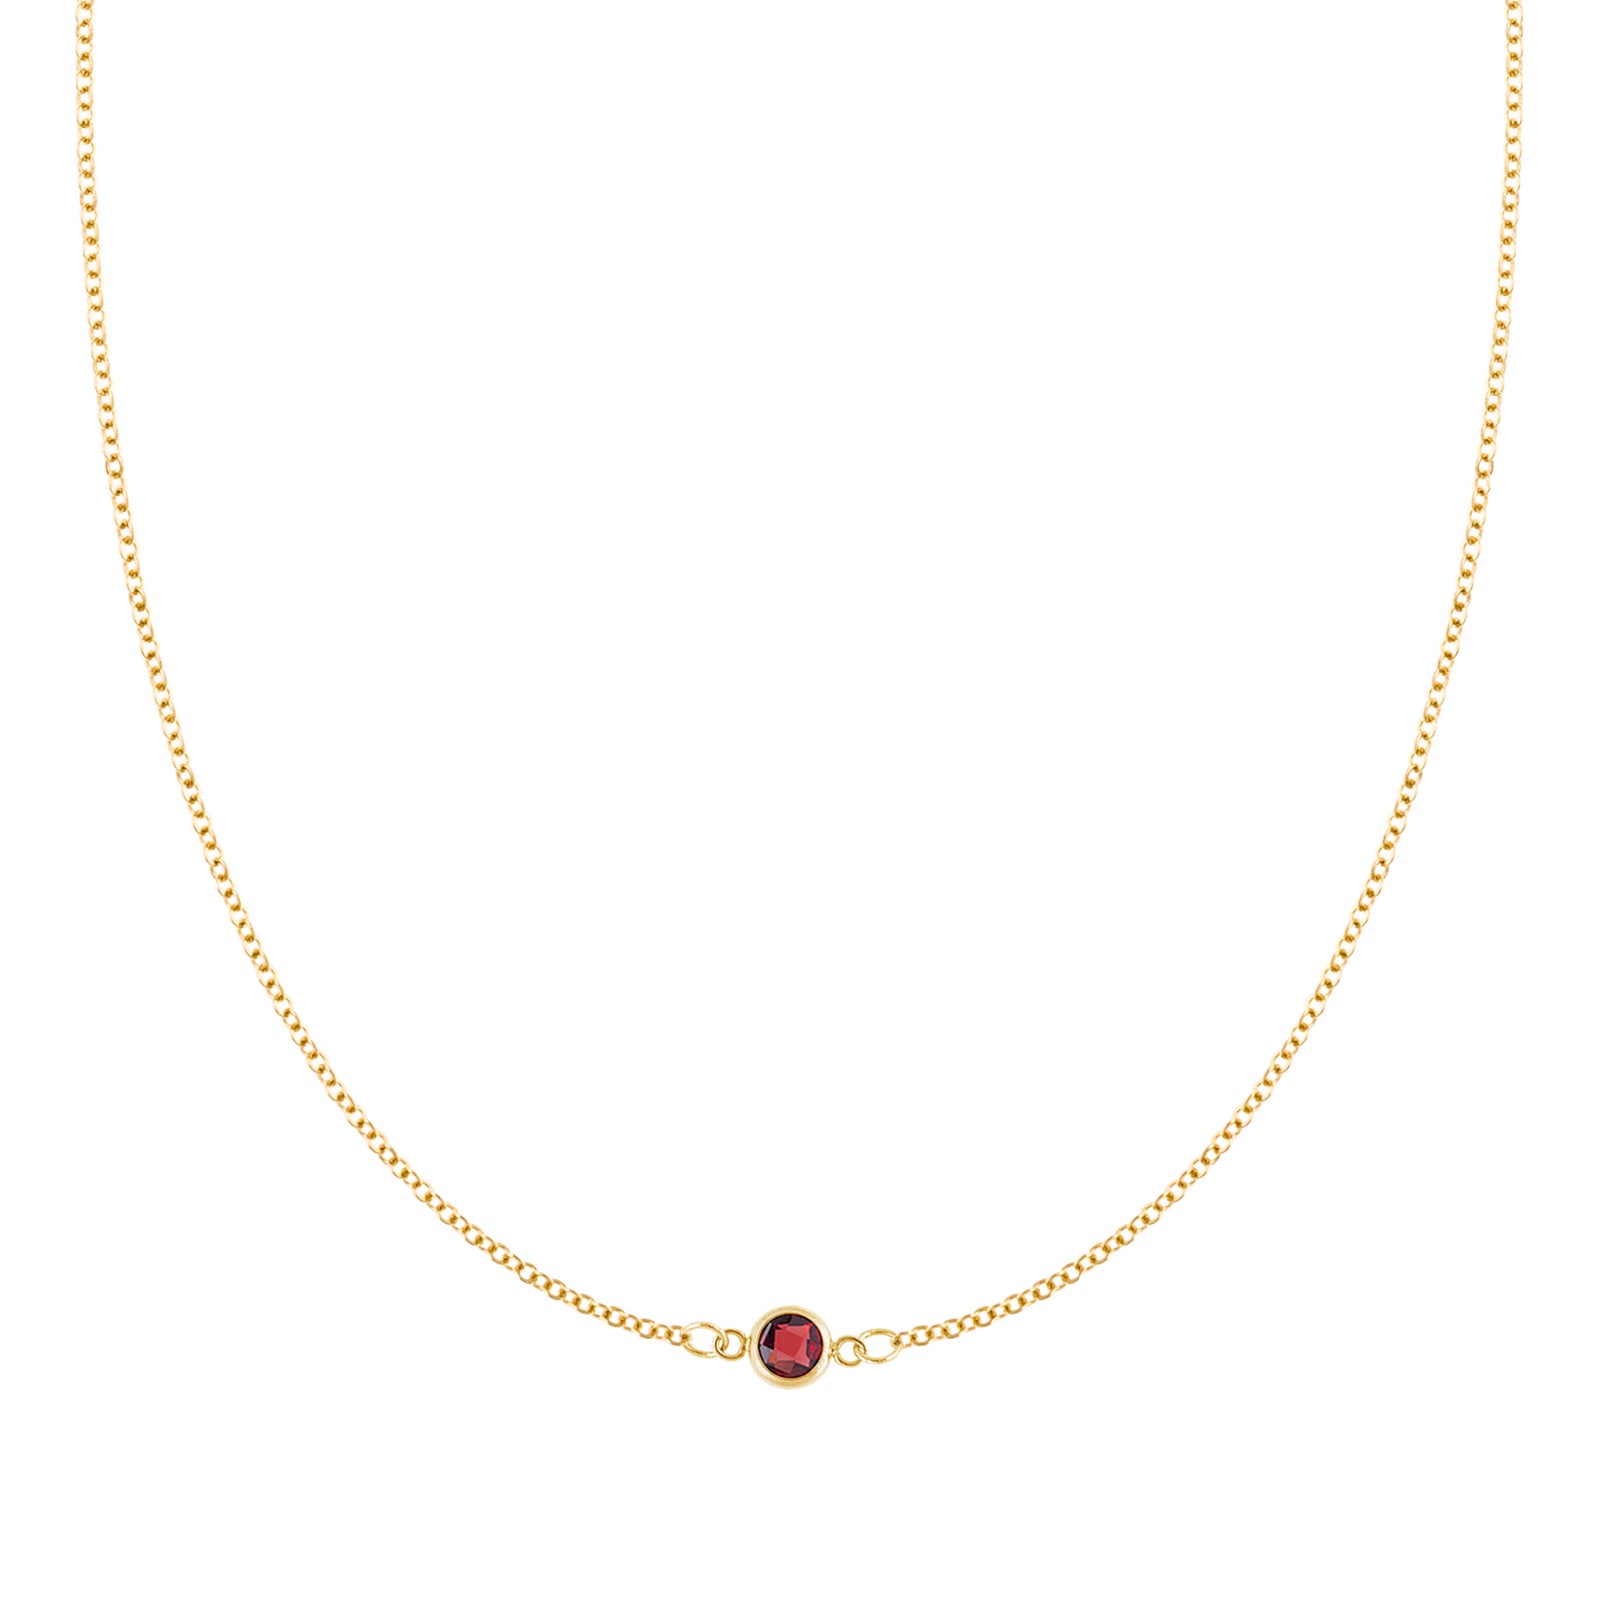 Classic 1 Garnet Necklace in 14k Gold (January)